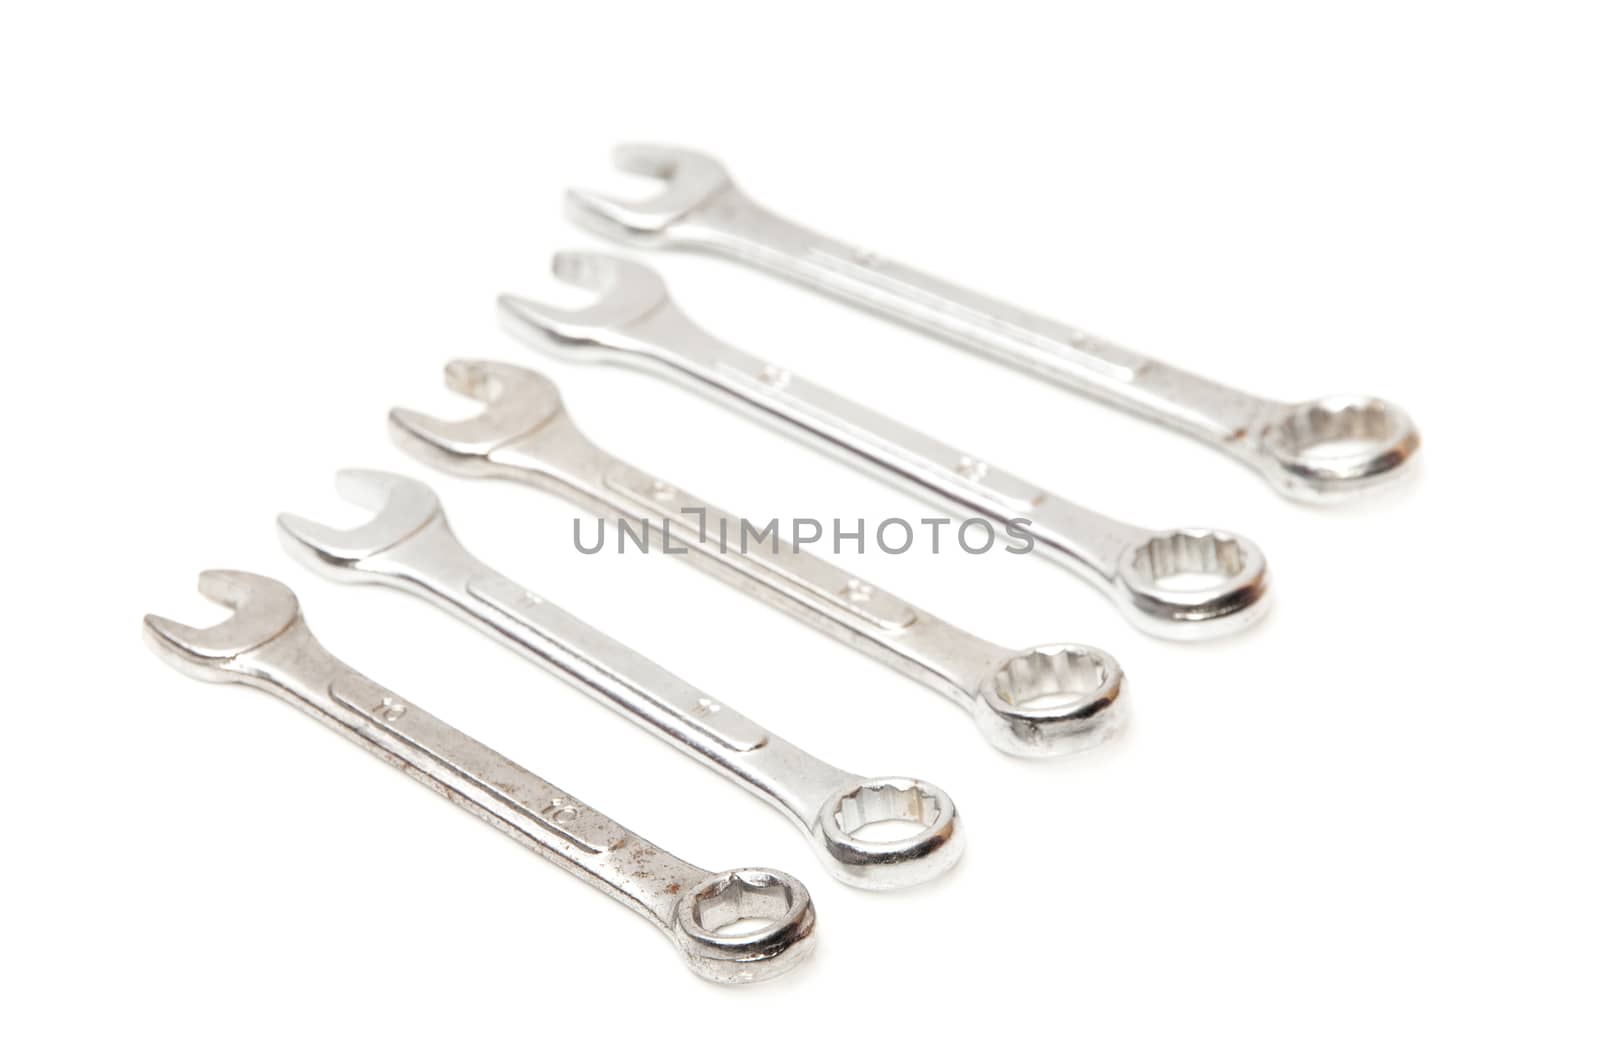 industrial tools on a white background